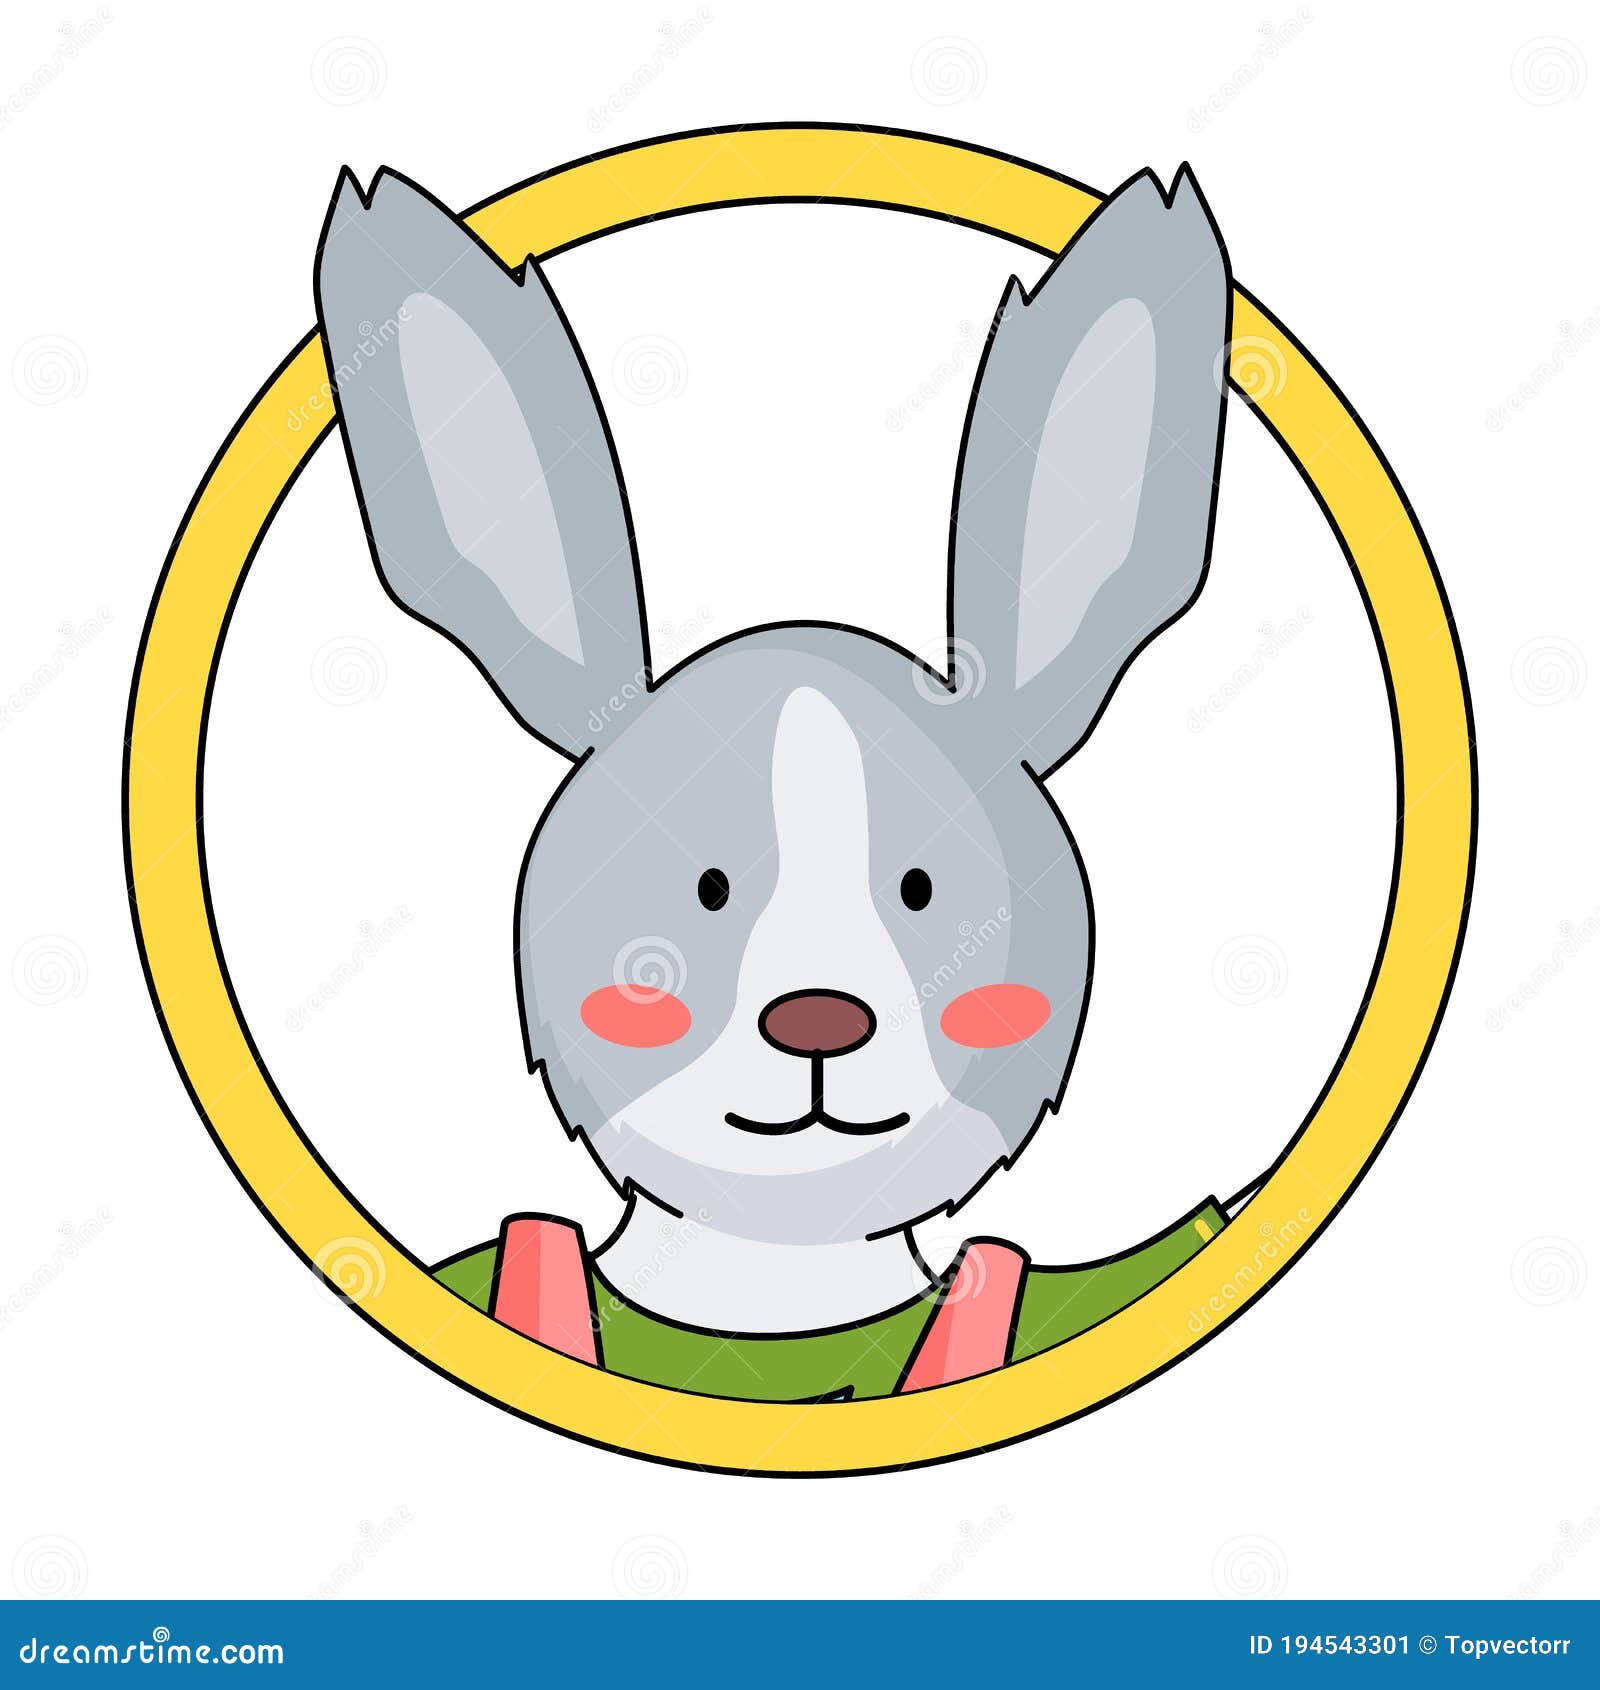 Cute Avatar of Bunny or Rabbit in Circle, Funny Wild Animal, Portrait ...